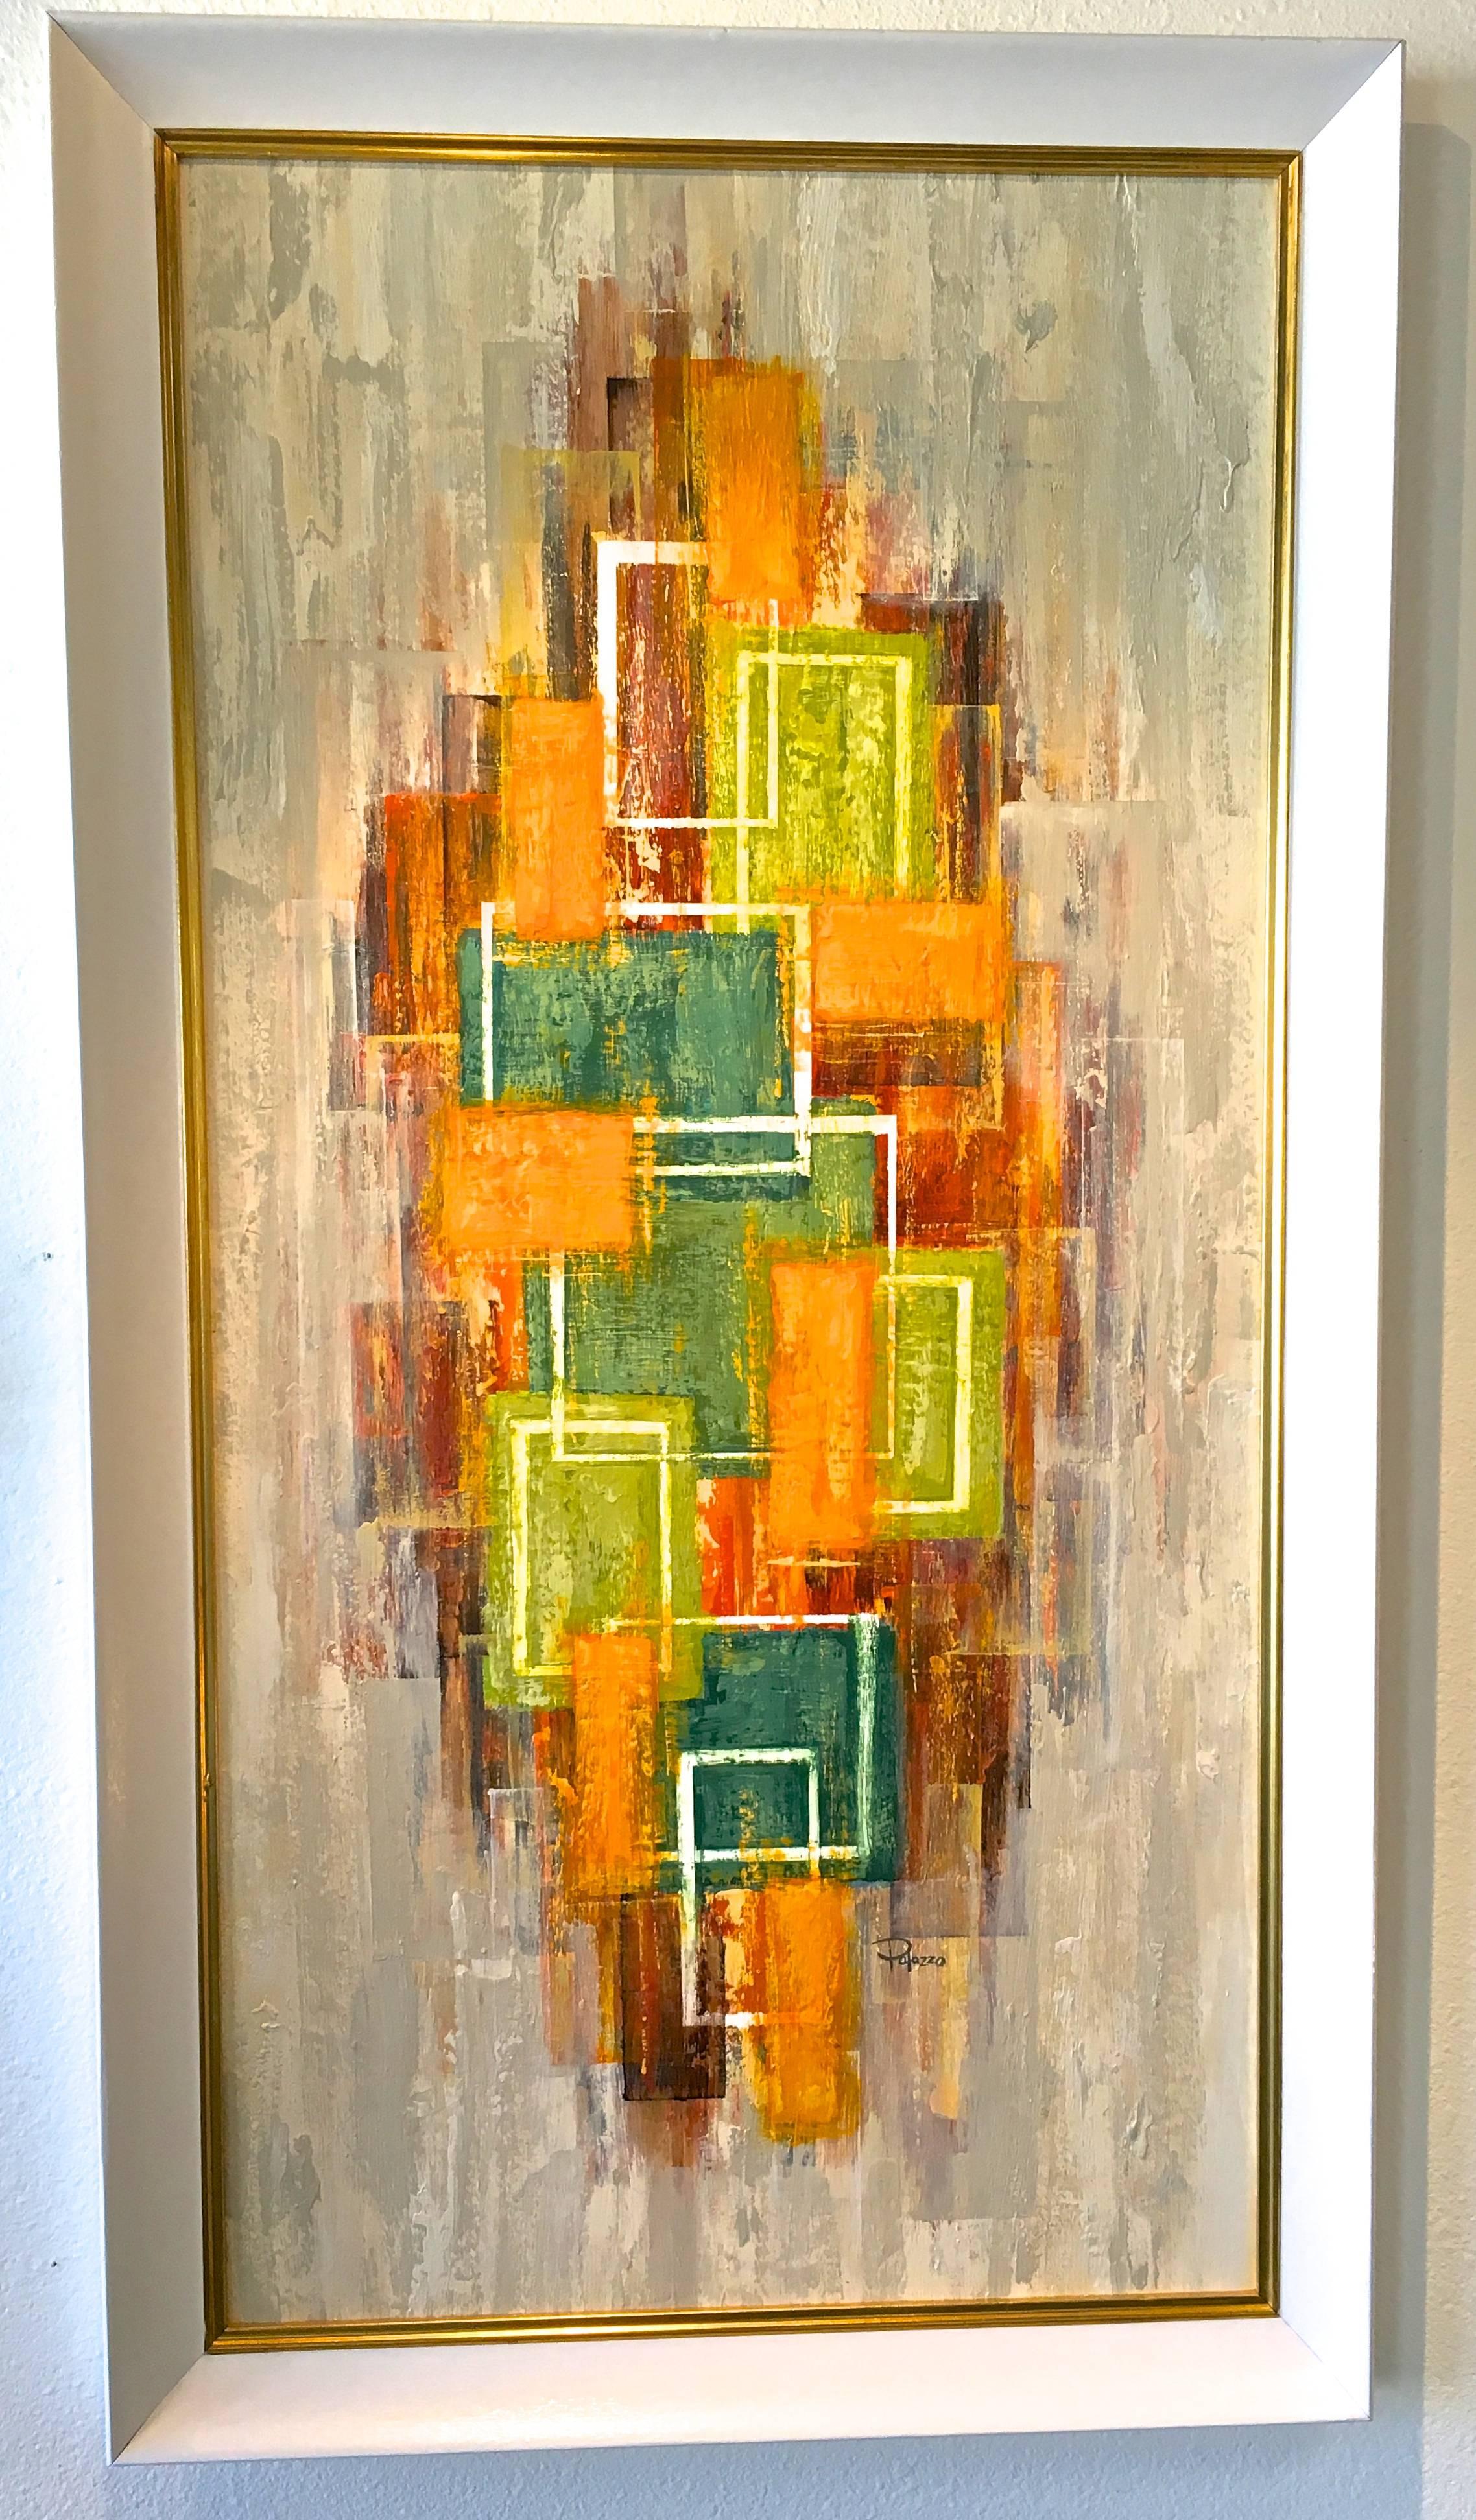 Contemporary Vintage Inspired Original Acrylic Abstract by Bret Palazzo in Vintage Frame For Sale